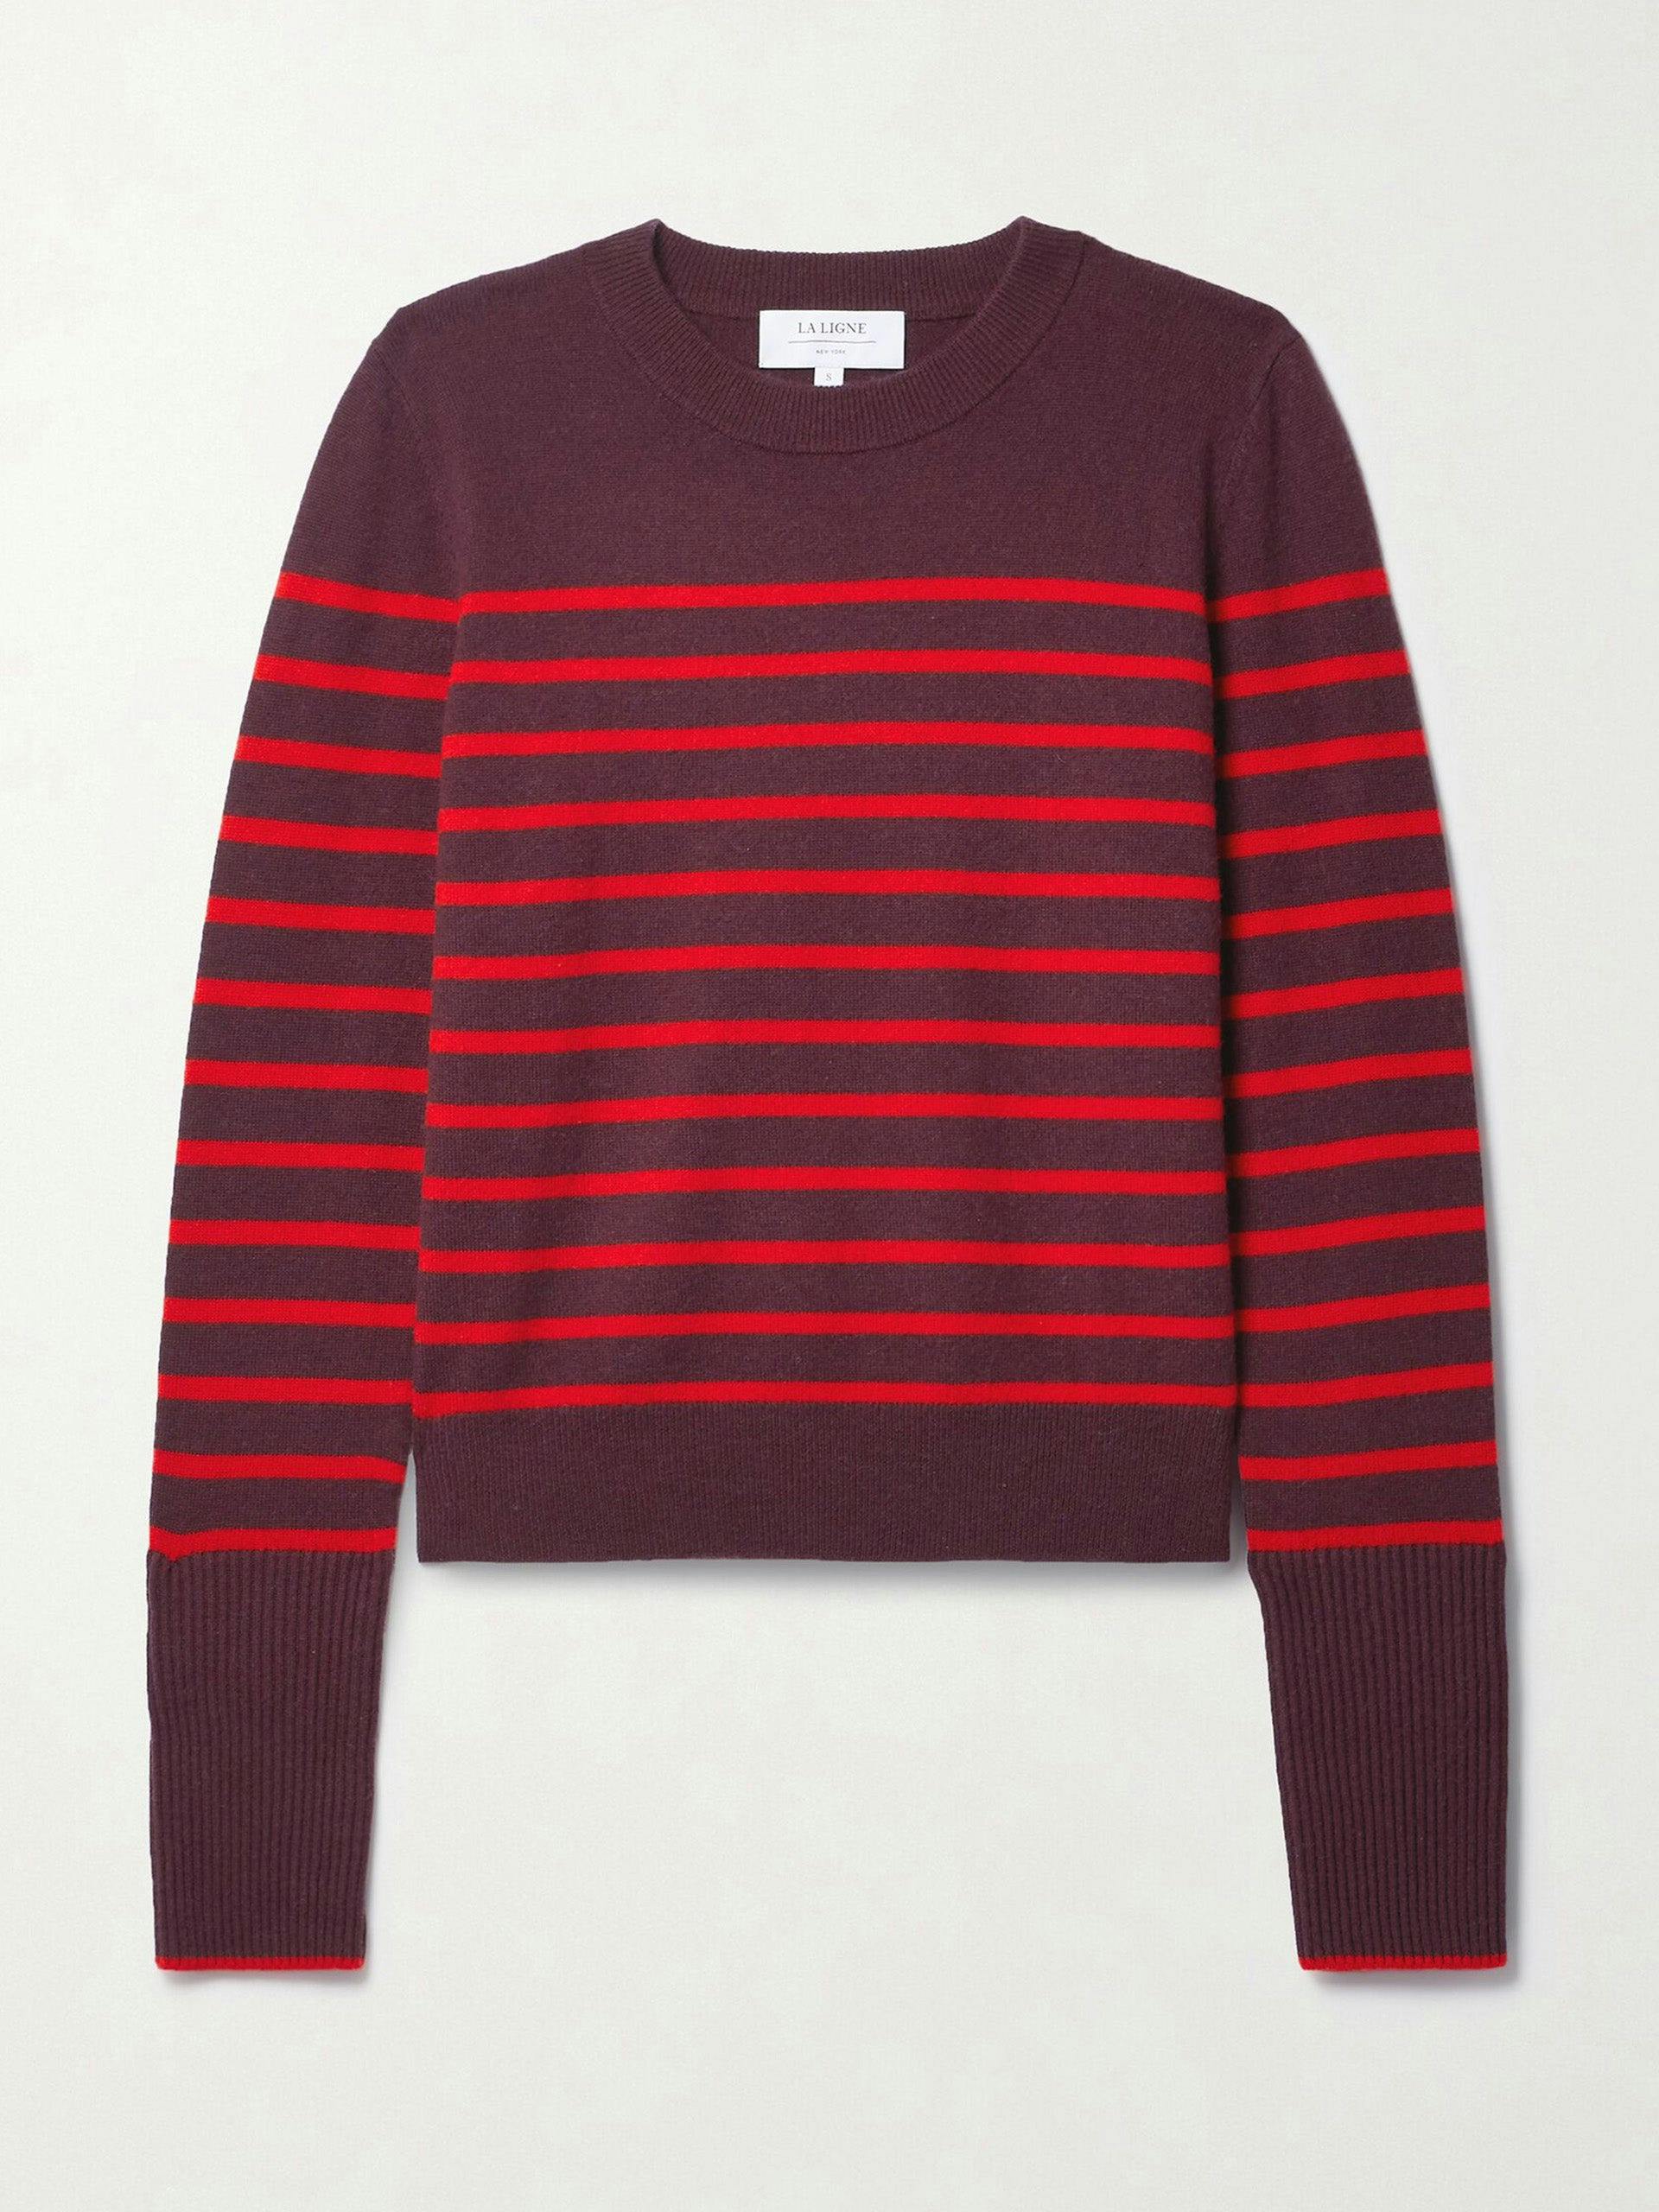 Lean Lines striped cashmere sweater